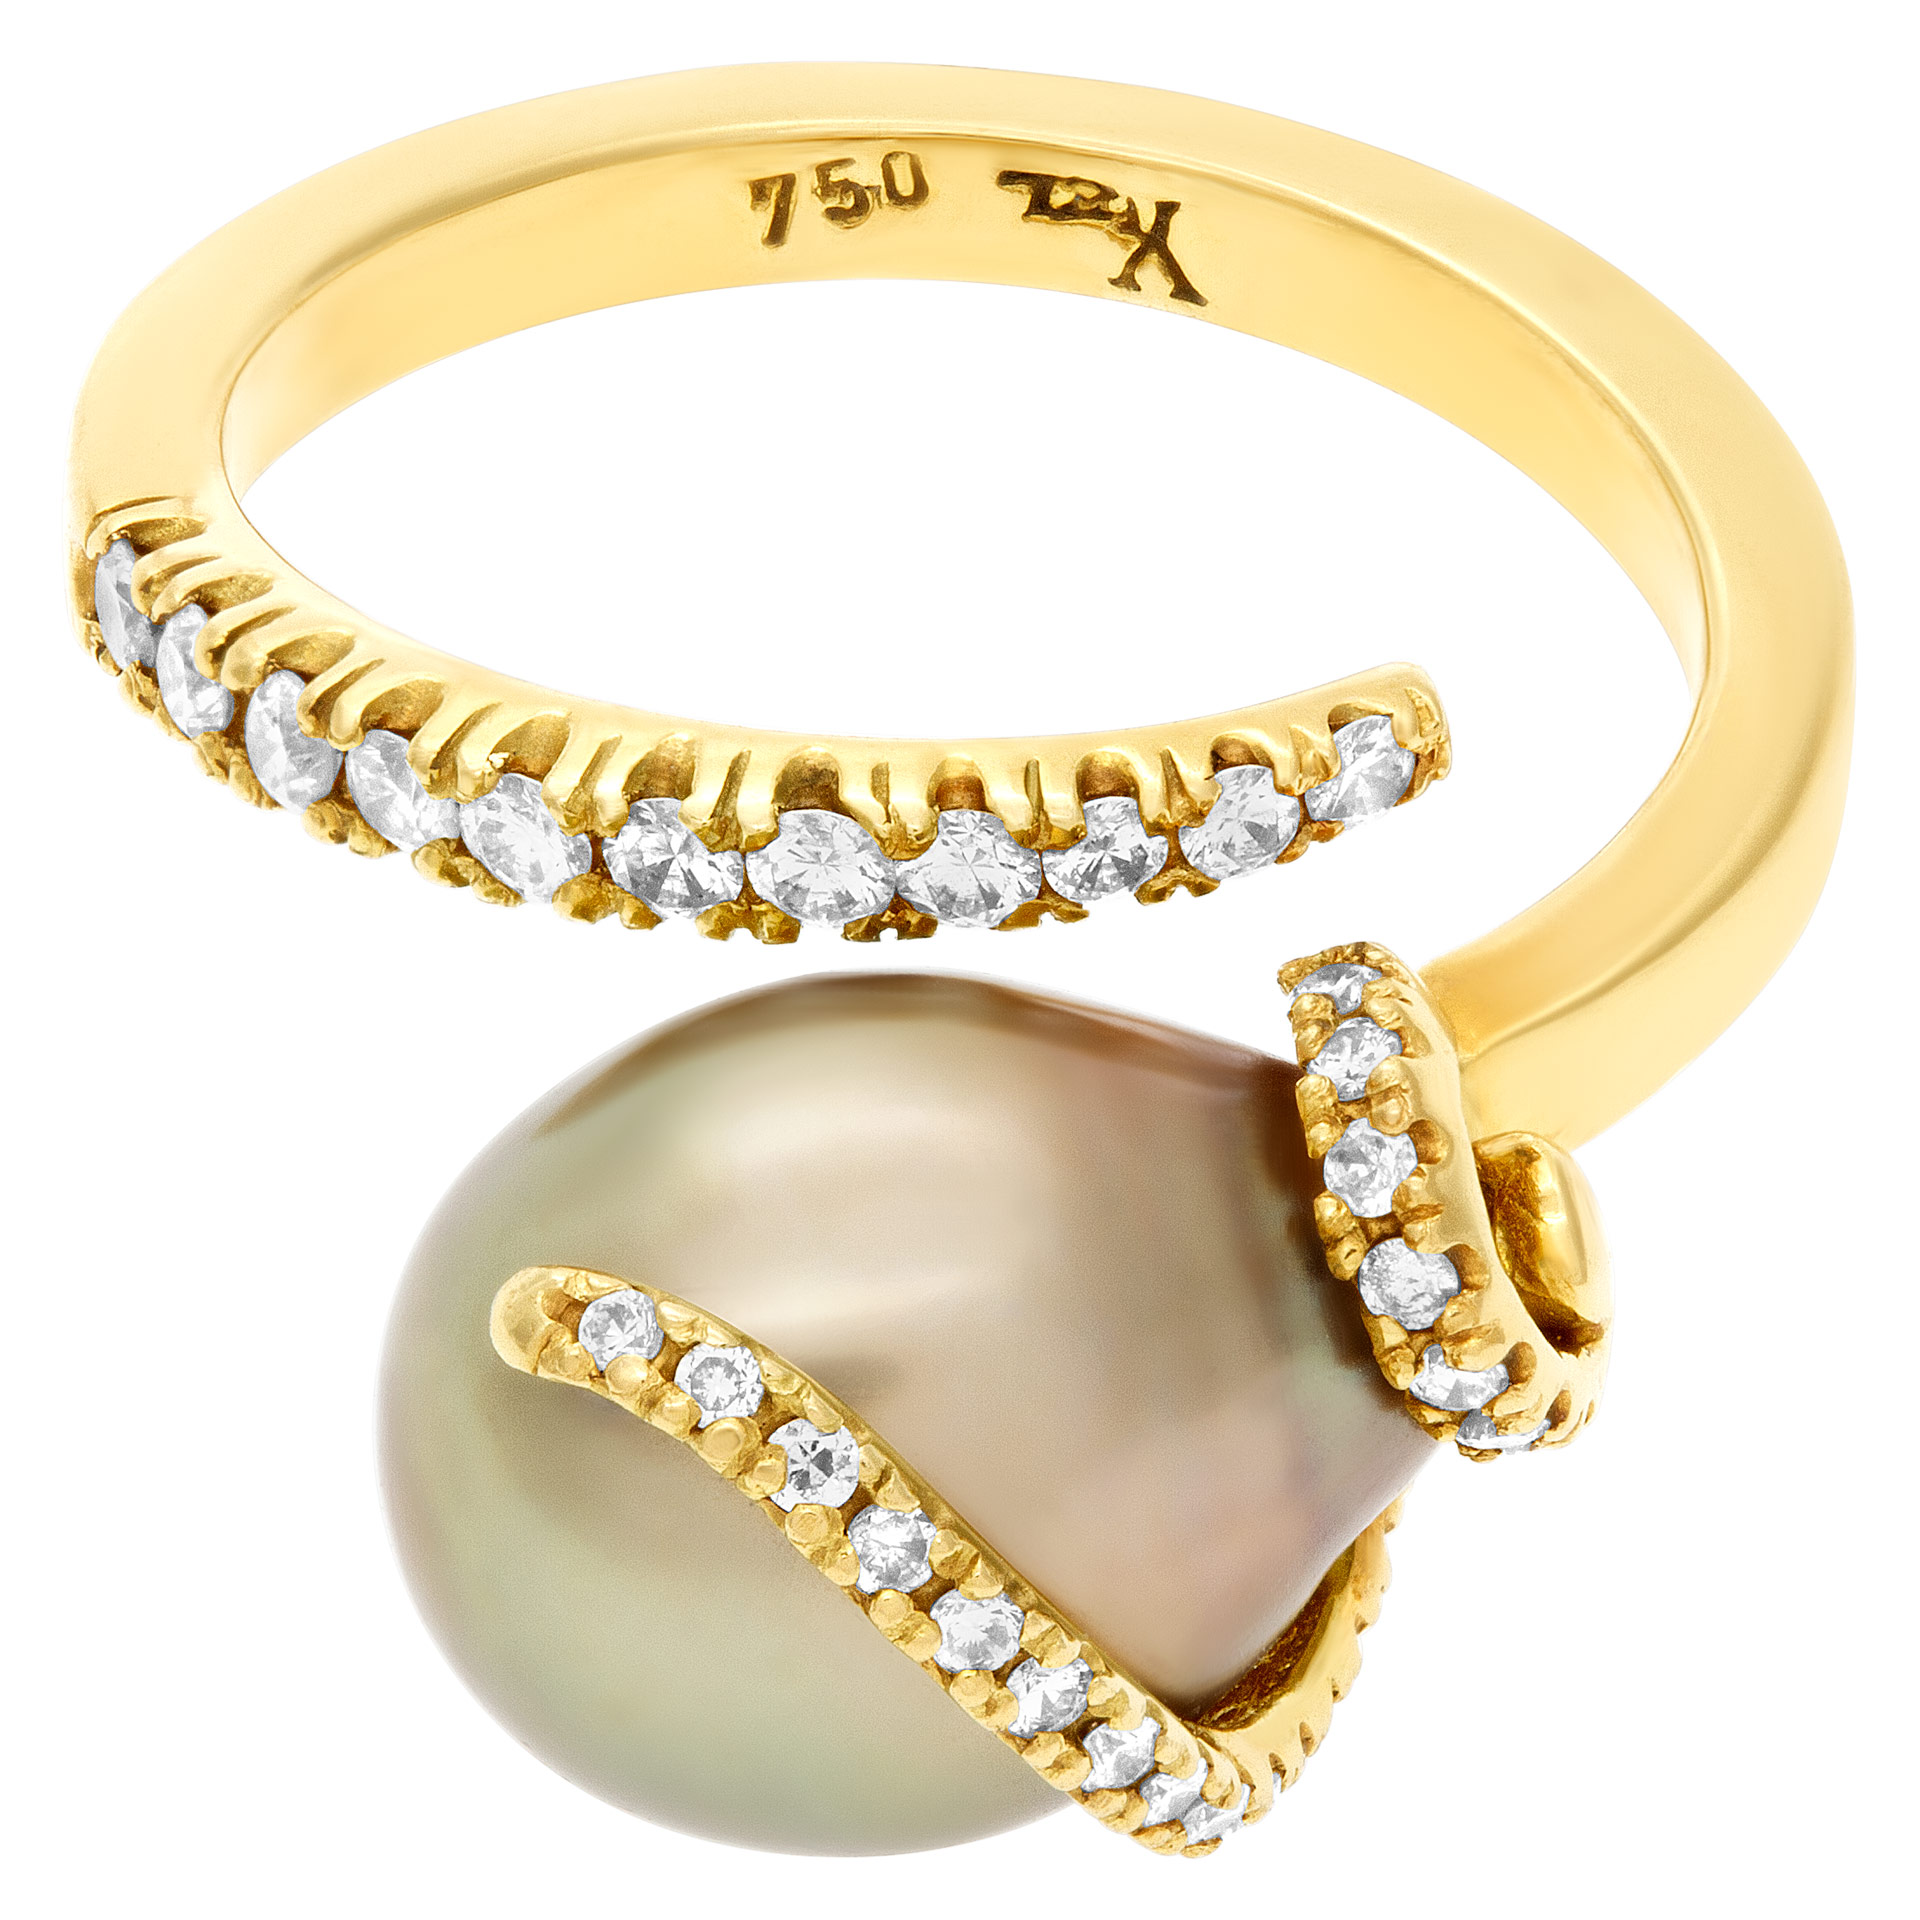 South Sea pearl ring with diamond accents in 18k gold